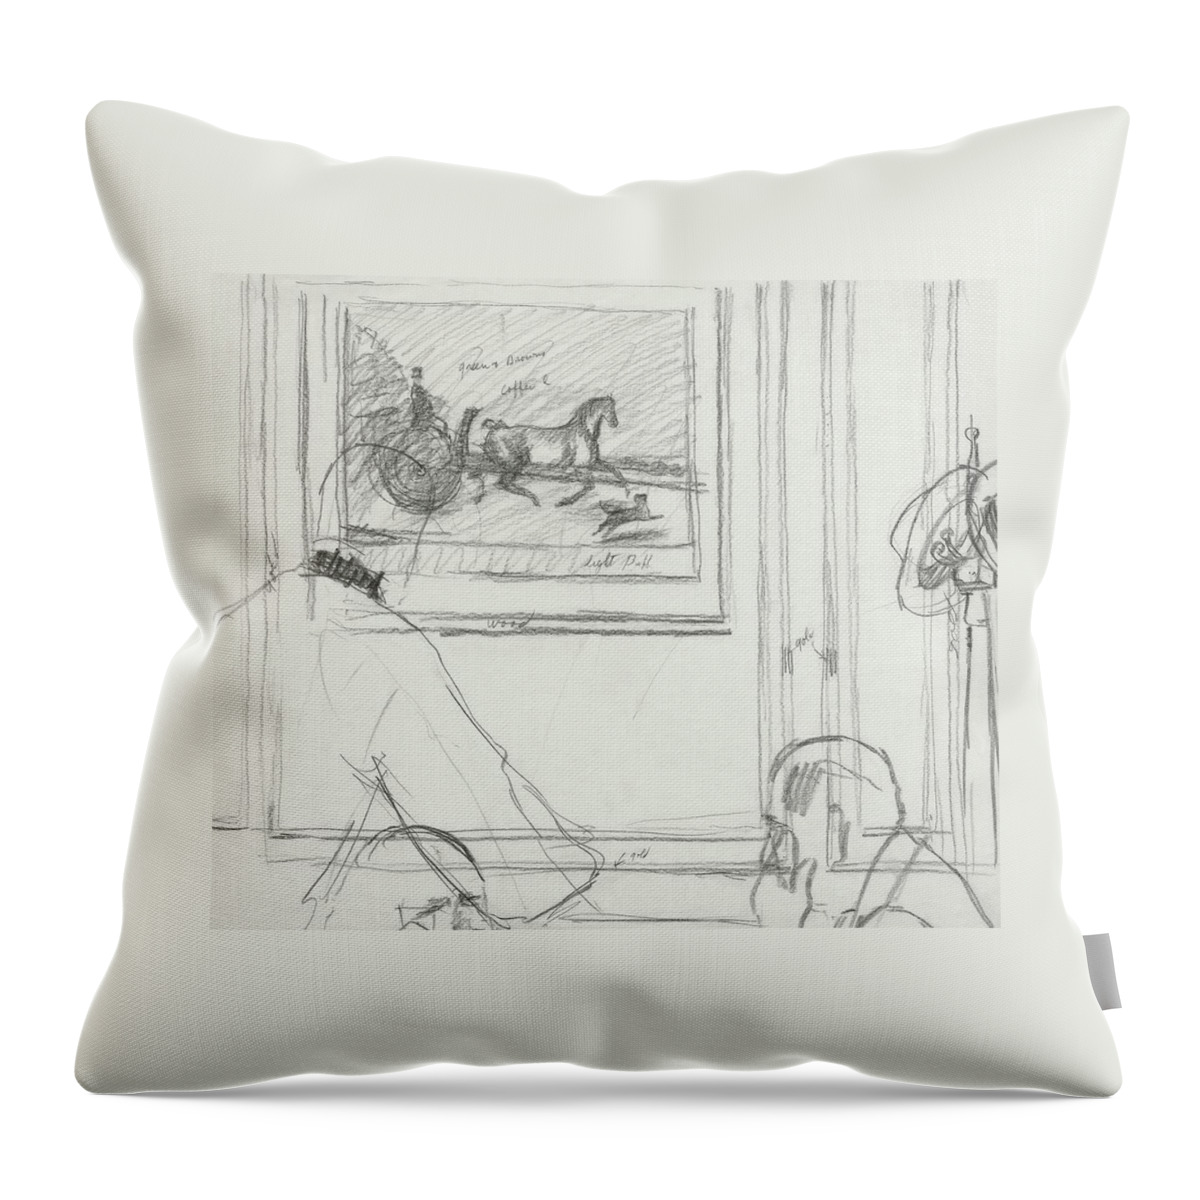 A Sketch Of A Horse Painting At A Bar Throw Pillow